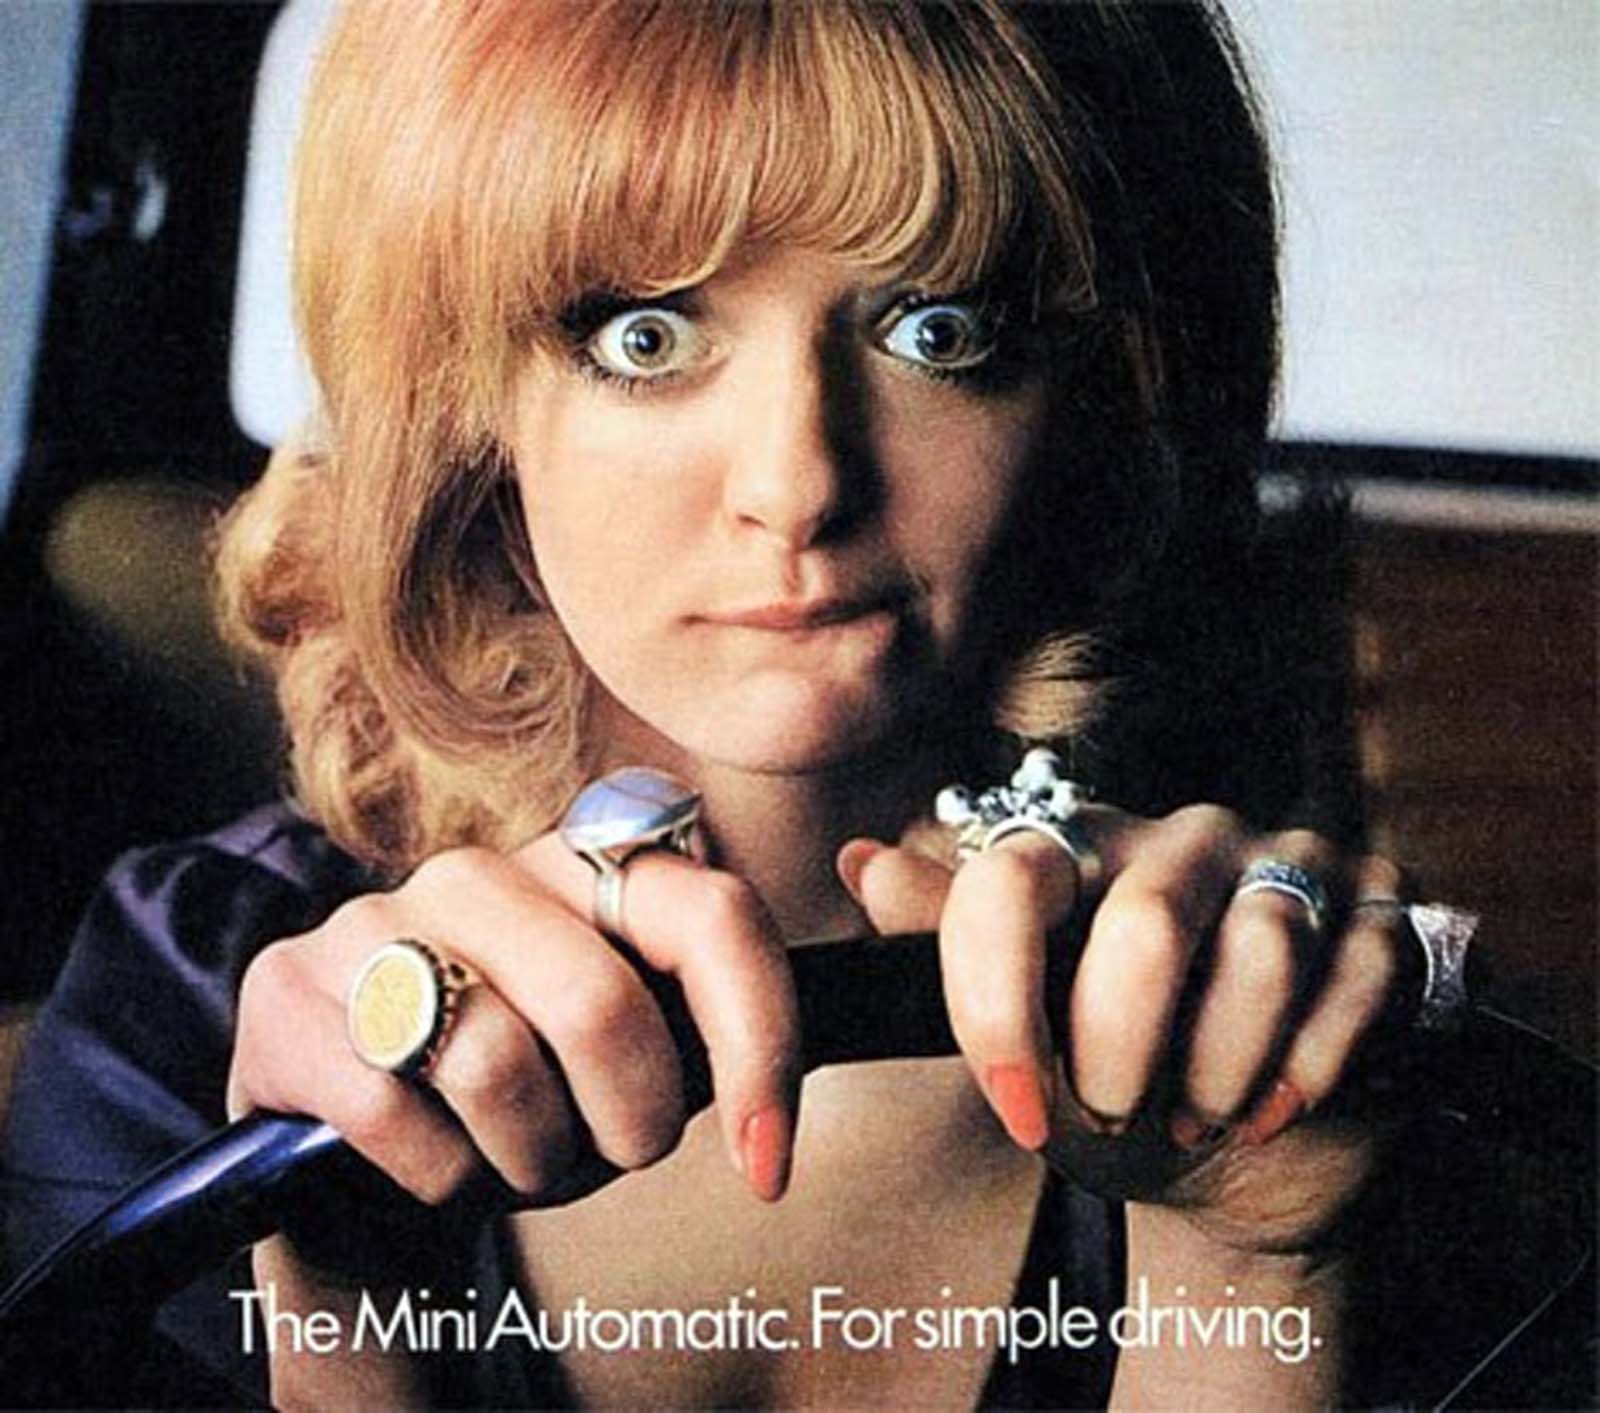 Advertisement for automatic transmission.